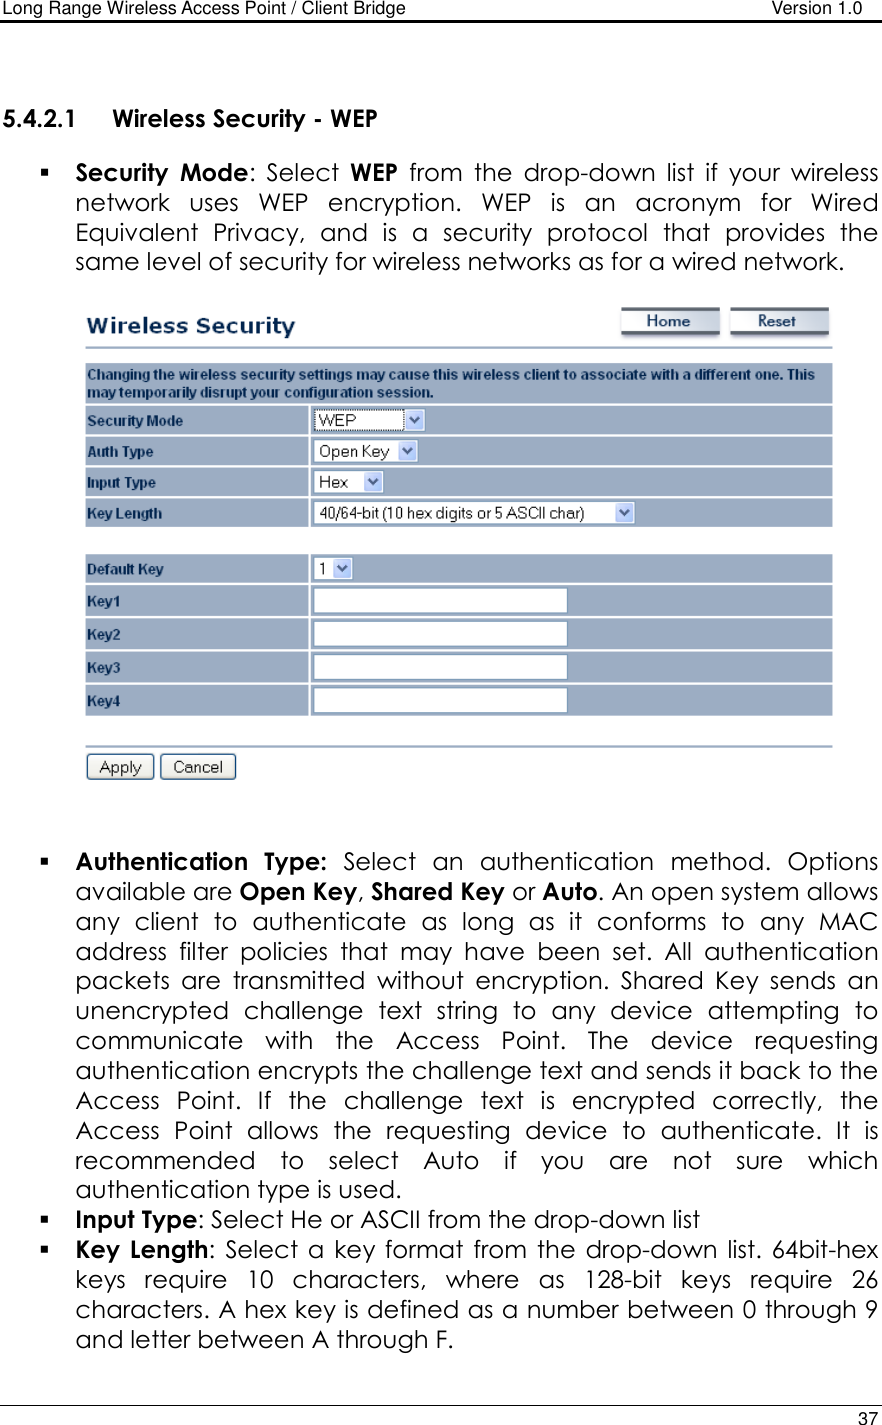 Long Range Wireless Access Point / Client Bridge                                   Version 1.0    37   5.4.2.1 Wireless Security - WEP  Security Mode:  Select  WEP  from  the  drop-down  list  if  your  wireless network  uses  WEP  encryption.  WEP  is  an  acronym  for  Wired Equivalent  Privacy,  and  is  a  security  protocol  that  provides  the same level of security for wireless networks as for a wired network.       Authentication  Type:  Select  an  authentication  method.  Options available are Open Key, Shared Key or Auto. An open system allows any  client  to  authenticate  as  long  as  it  conforms  to  any  MAC address  filter  policies  that  may  have  been  set.  All  authentication packets  are  transmitted  without  encryption.  Shared  Key  sends  an unencrypted  challenge  text  string  to  any  device  attempting  to communicate  with  the  Access  Point.  The  device  requesting authentication encrypts the challenge text and sends it back to the Access  Point.  If  the  challenge  text  is  encrypted  correctly,  the Access  Point  allows  the  requesting  device  to  authenticate.  It  is recommended  to  select  Auto  if  you  are  not  sure  which authentication type is used.   Input Type: Select He or ASCII from the drop-down list  Key  Length:  Select a  key format  from  the  drop-down  list. 64bit-hex keys  require  10  characters,  where  as  128-bit  keys  require  26 characters. A hex key is defined as a number between 0 through 9 and letter between A through F. 